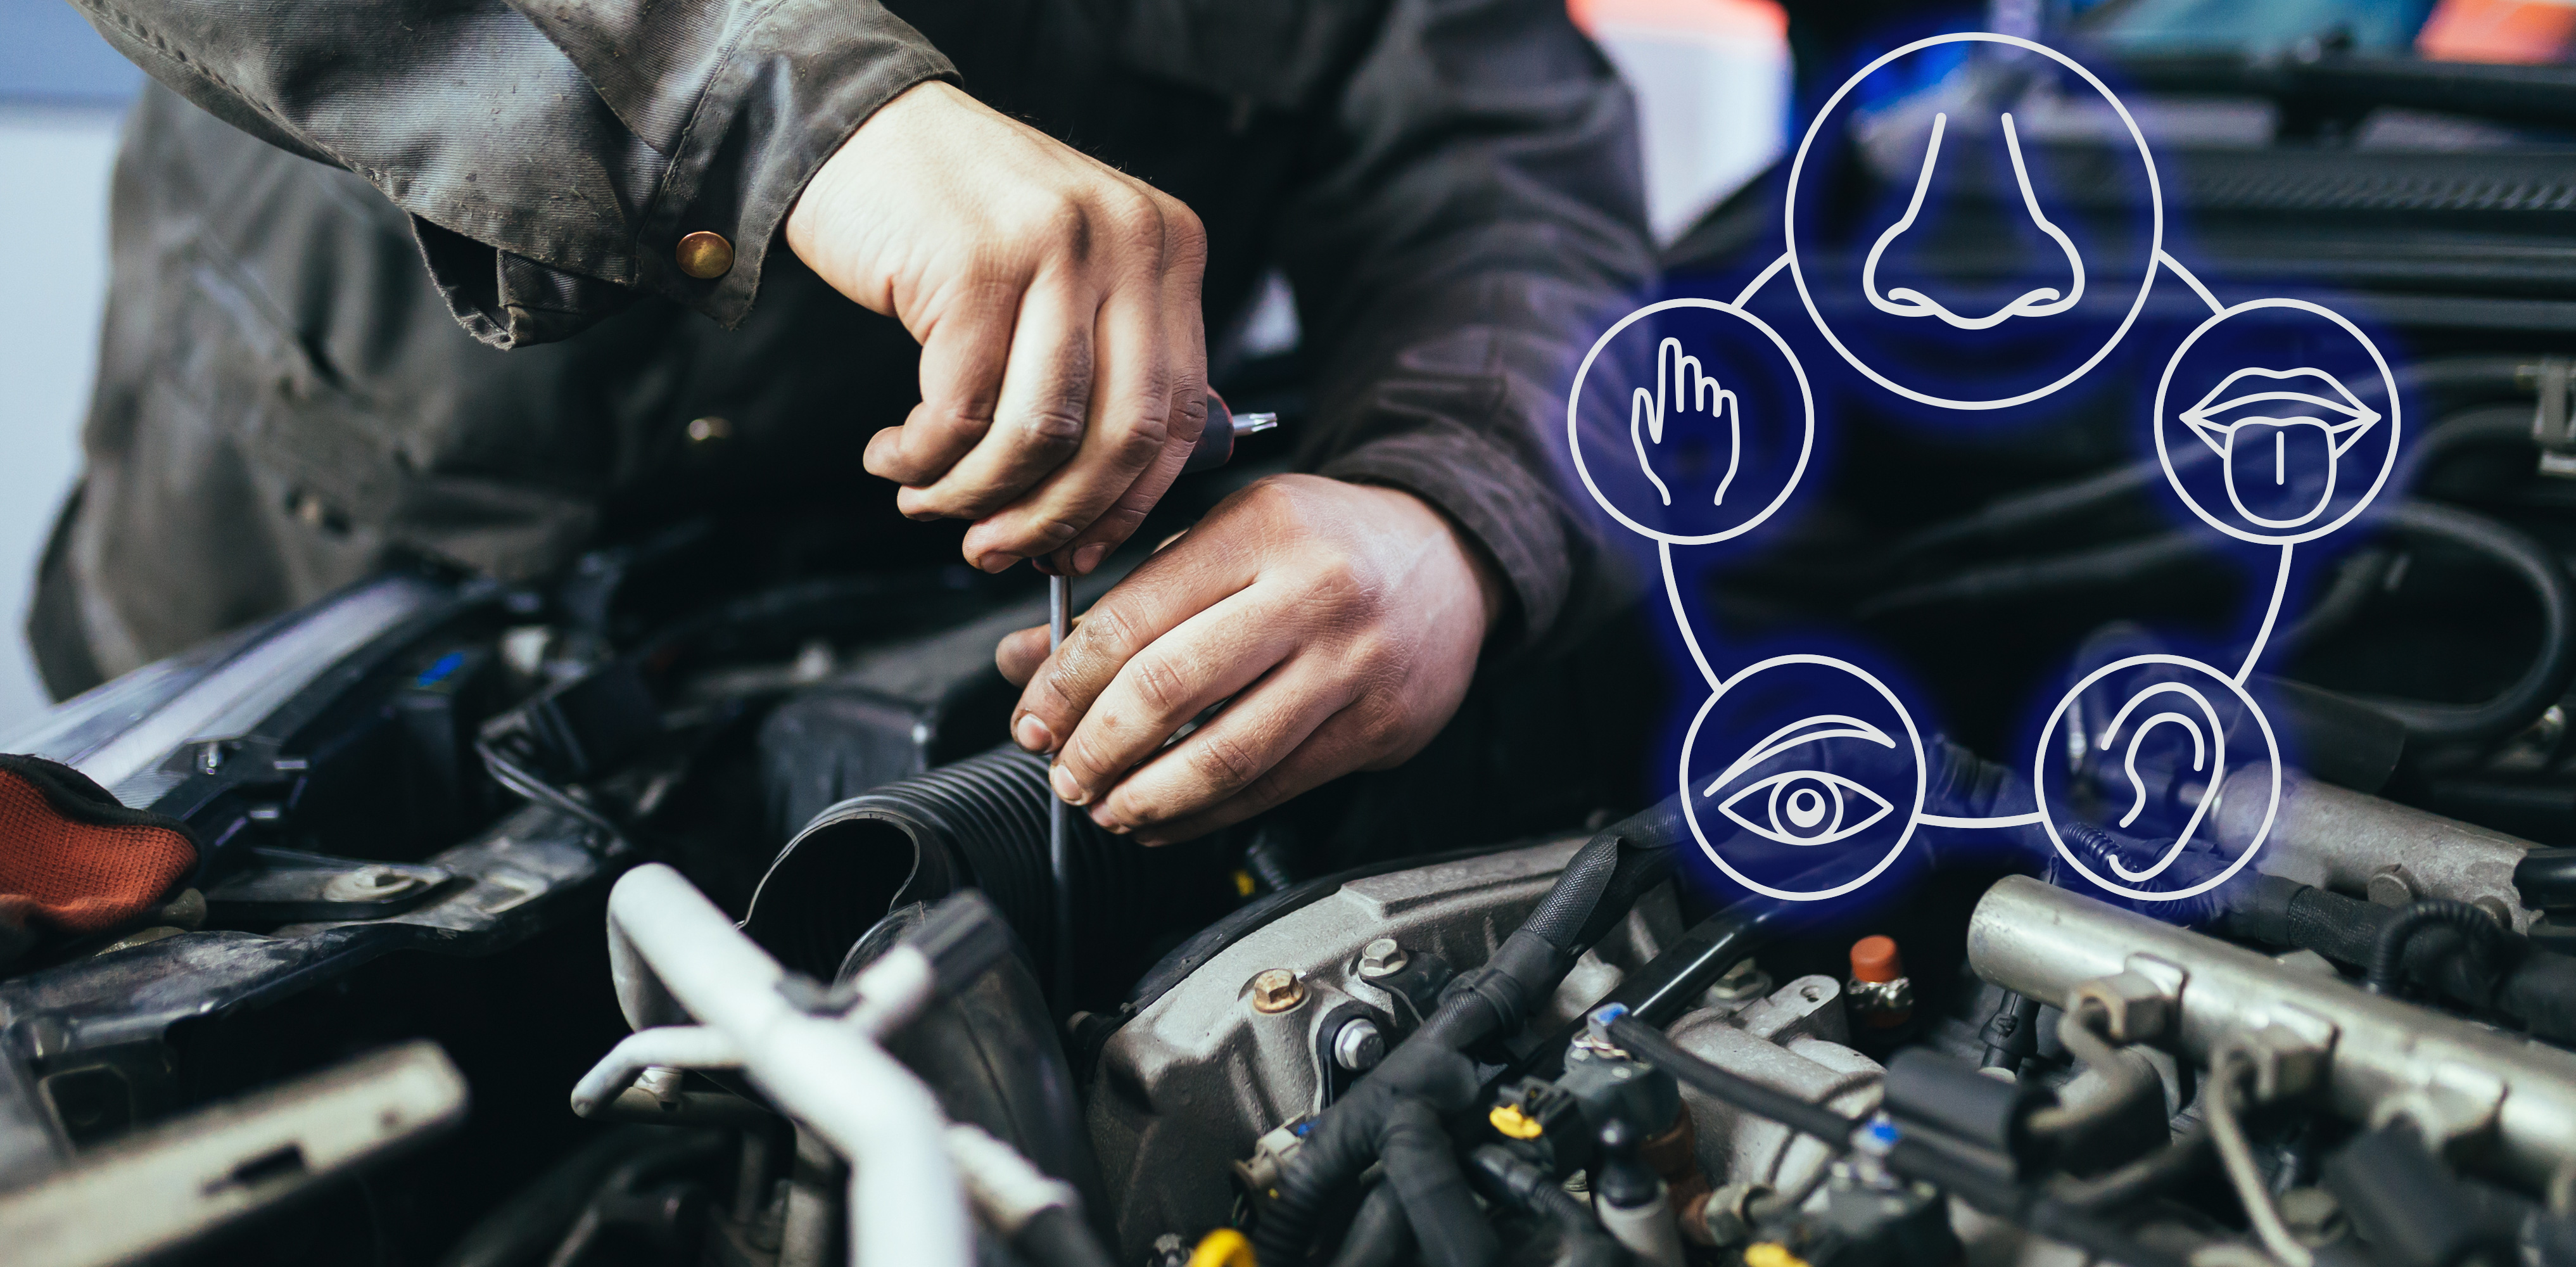 Use Your Sense of Smell to Diagnose Vehicle Problems